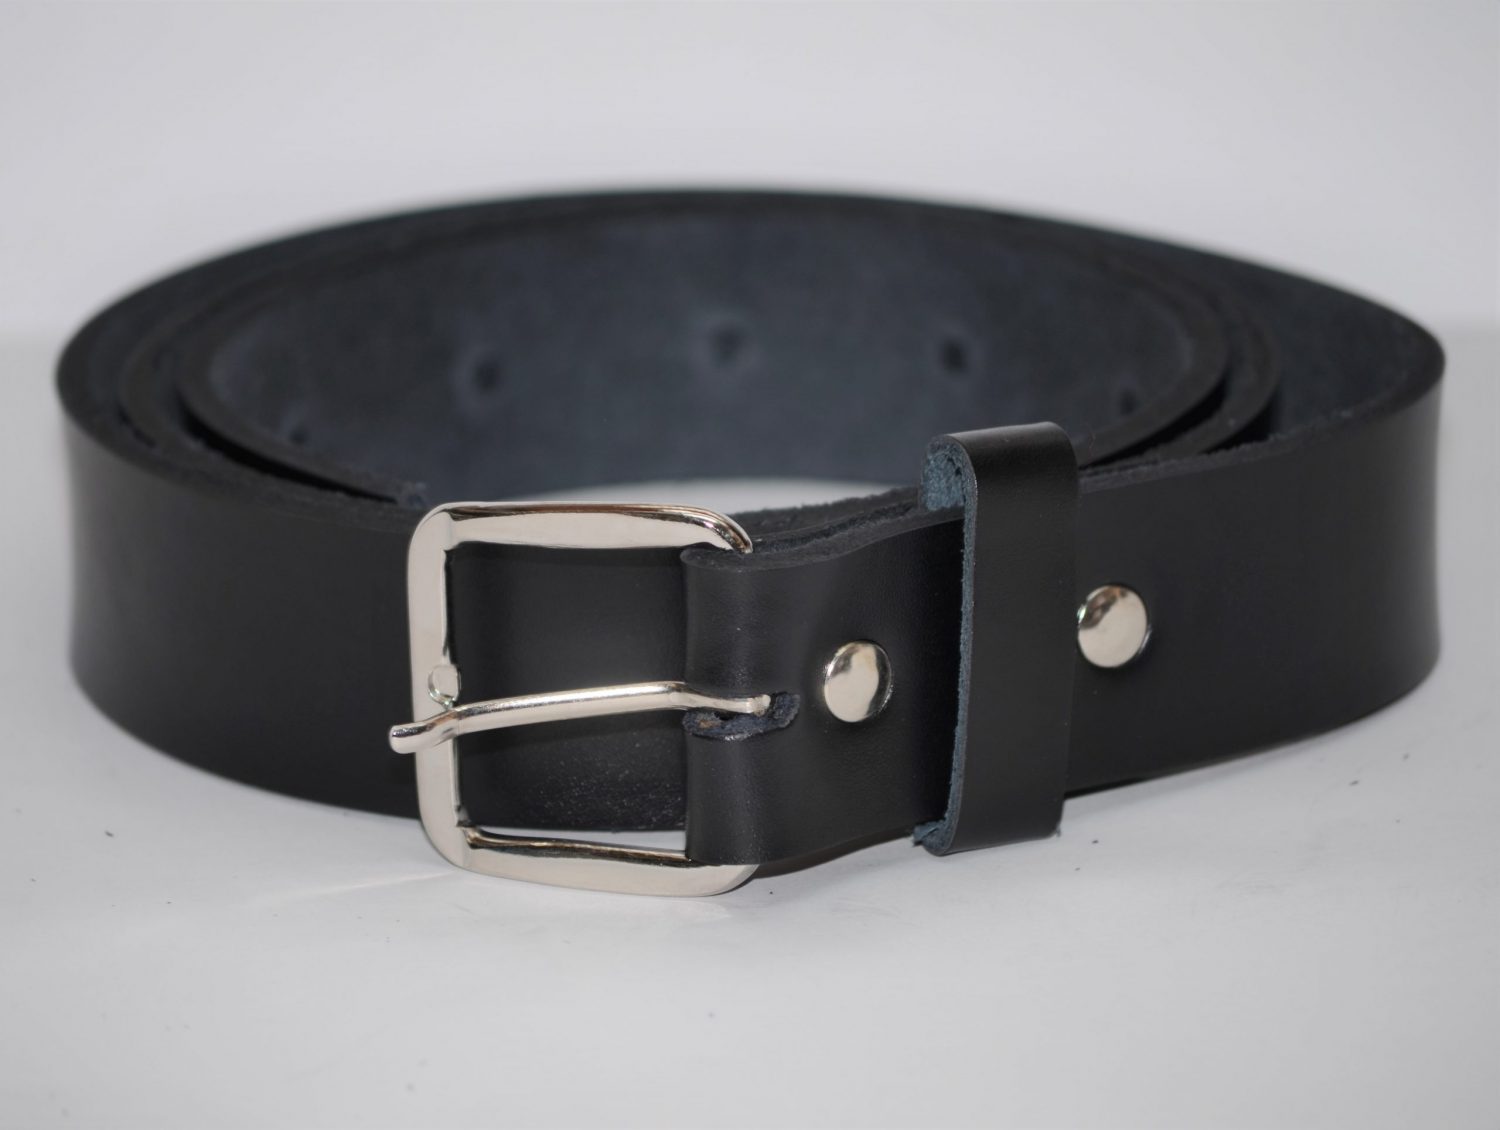 Tanmark Leather Belt With Square Buckle 1¼